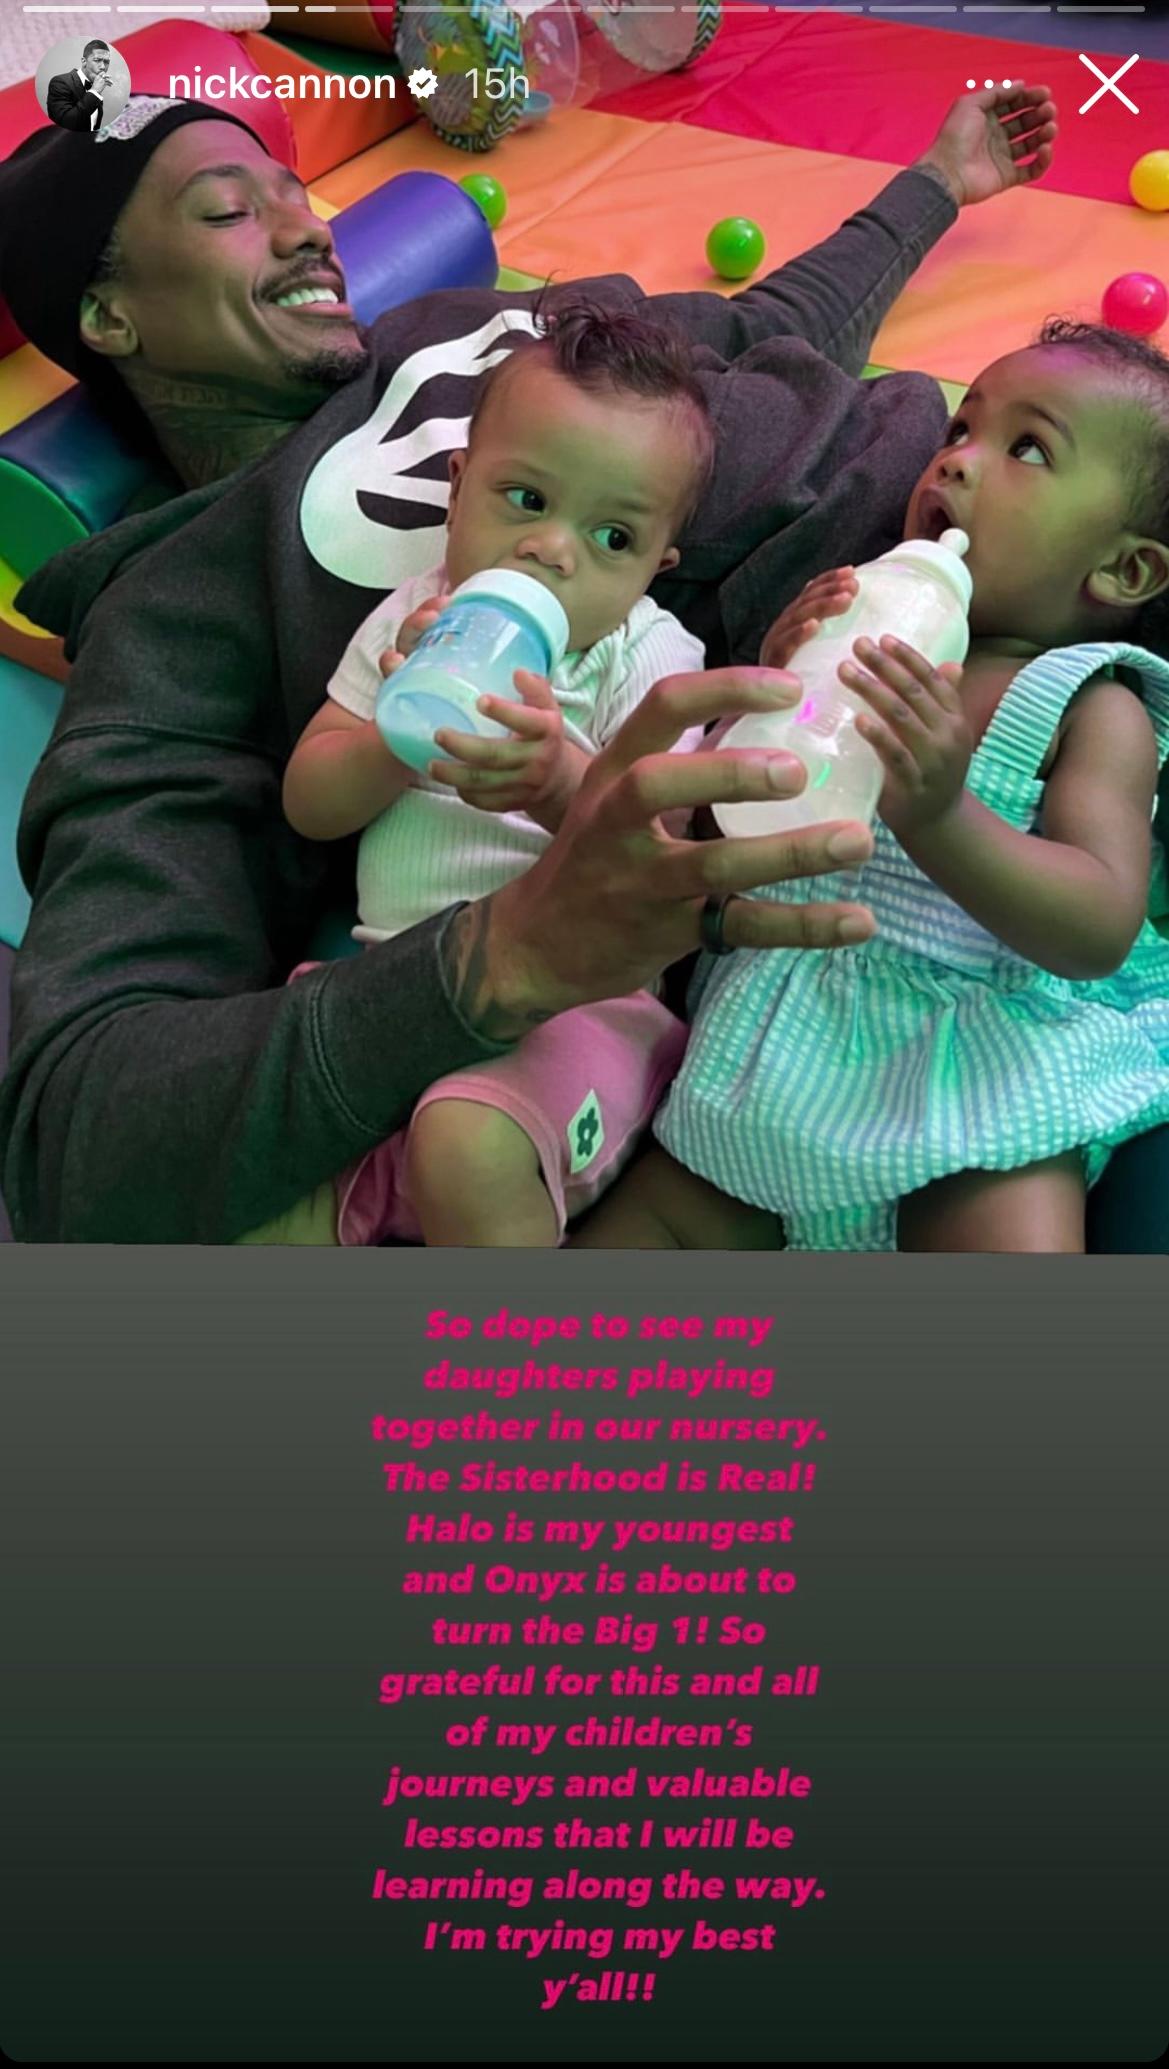 Nick Cannon gushes about his daughters bonding